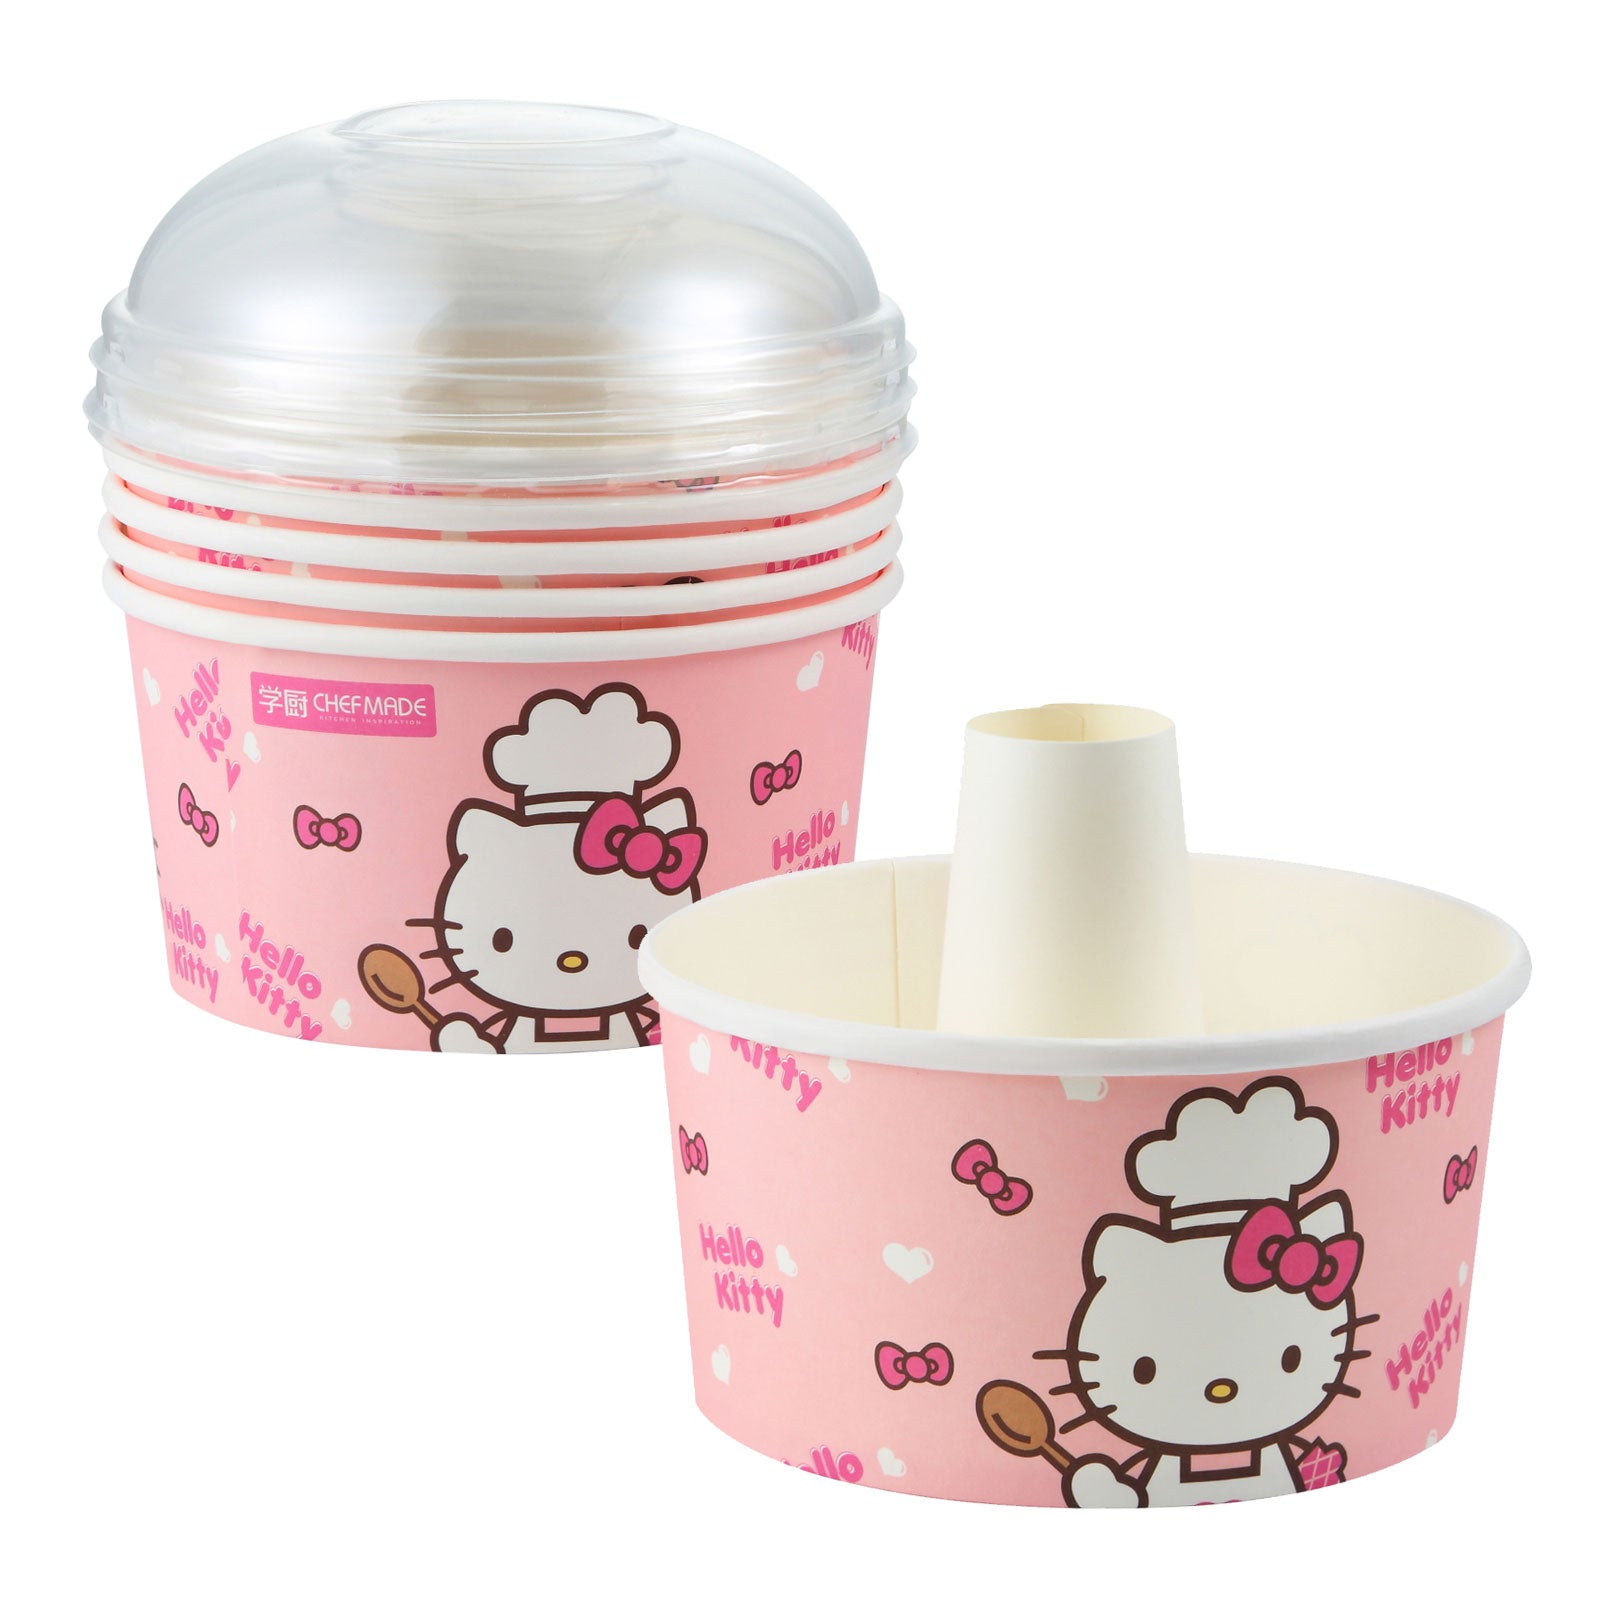 6" Hello Kitty Disposable Angel Food Paper Cake Pan with Plastic Lid